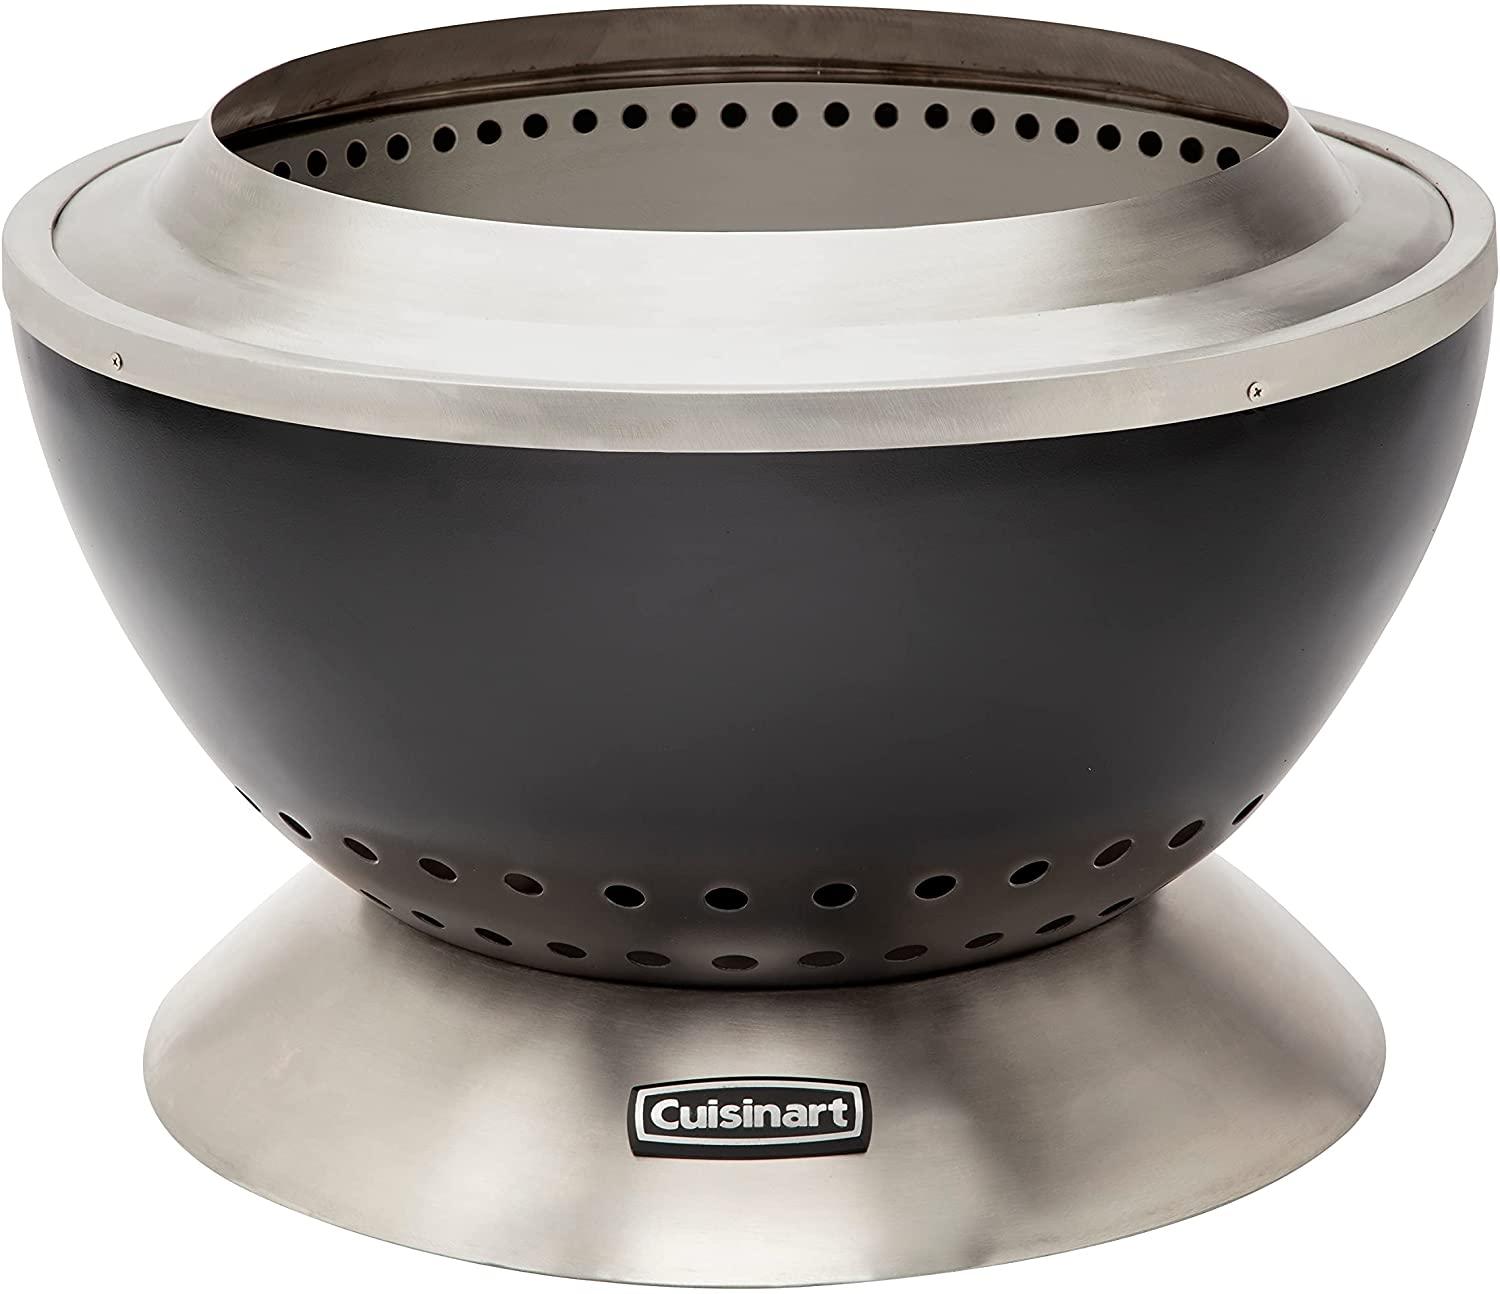 Cuisinart Cleanburn Smokeless 24in Fire Pit for $209.99 Shipped